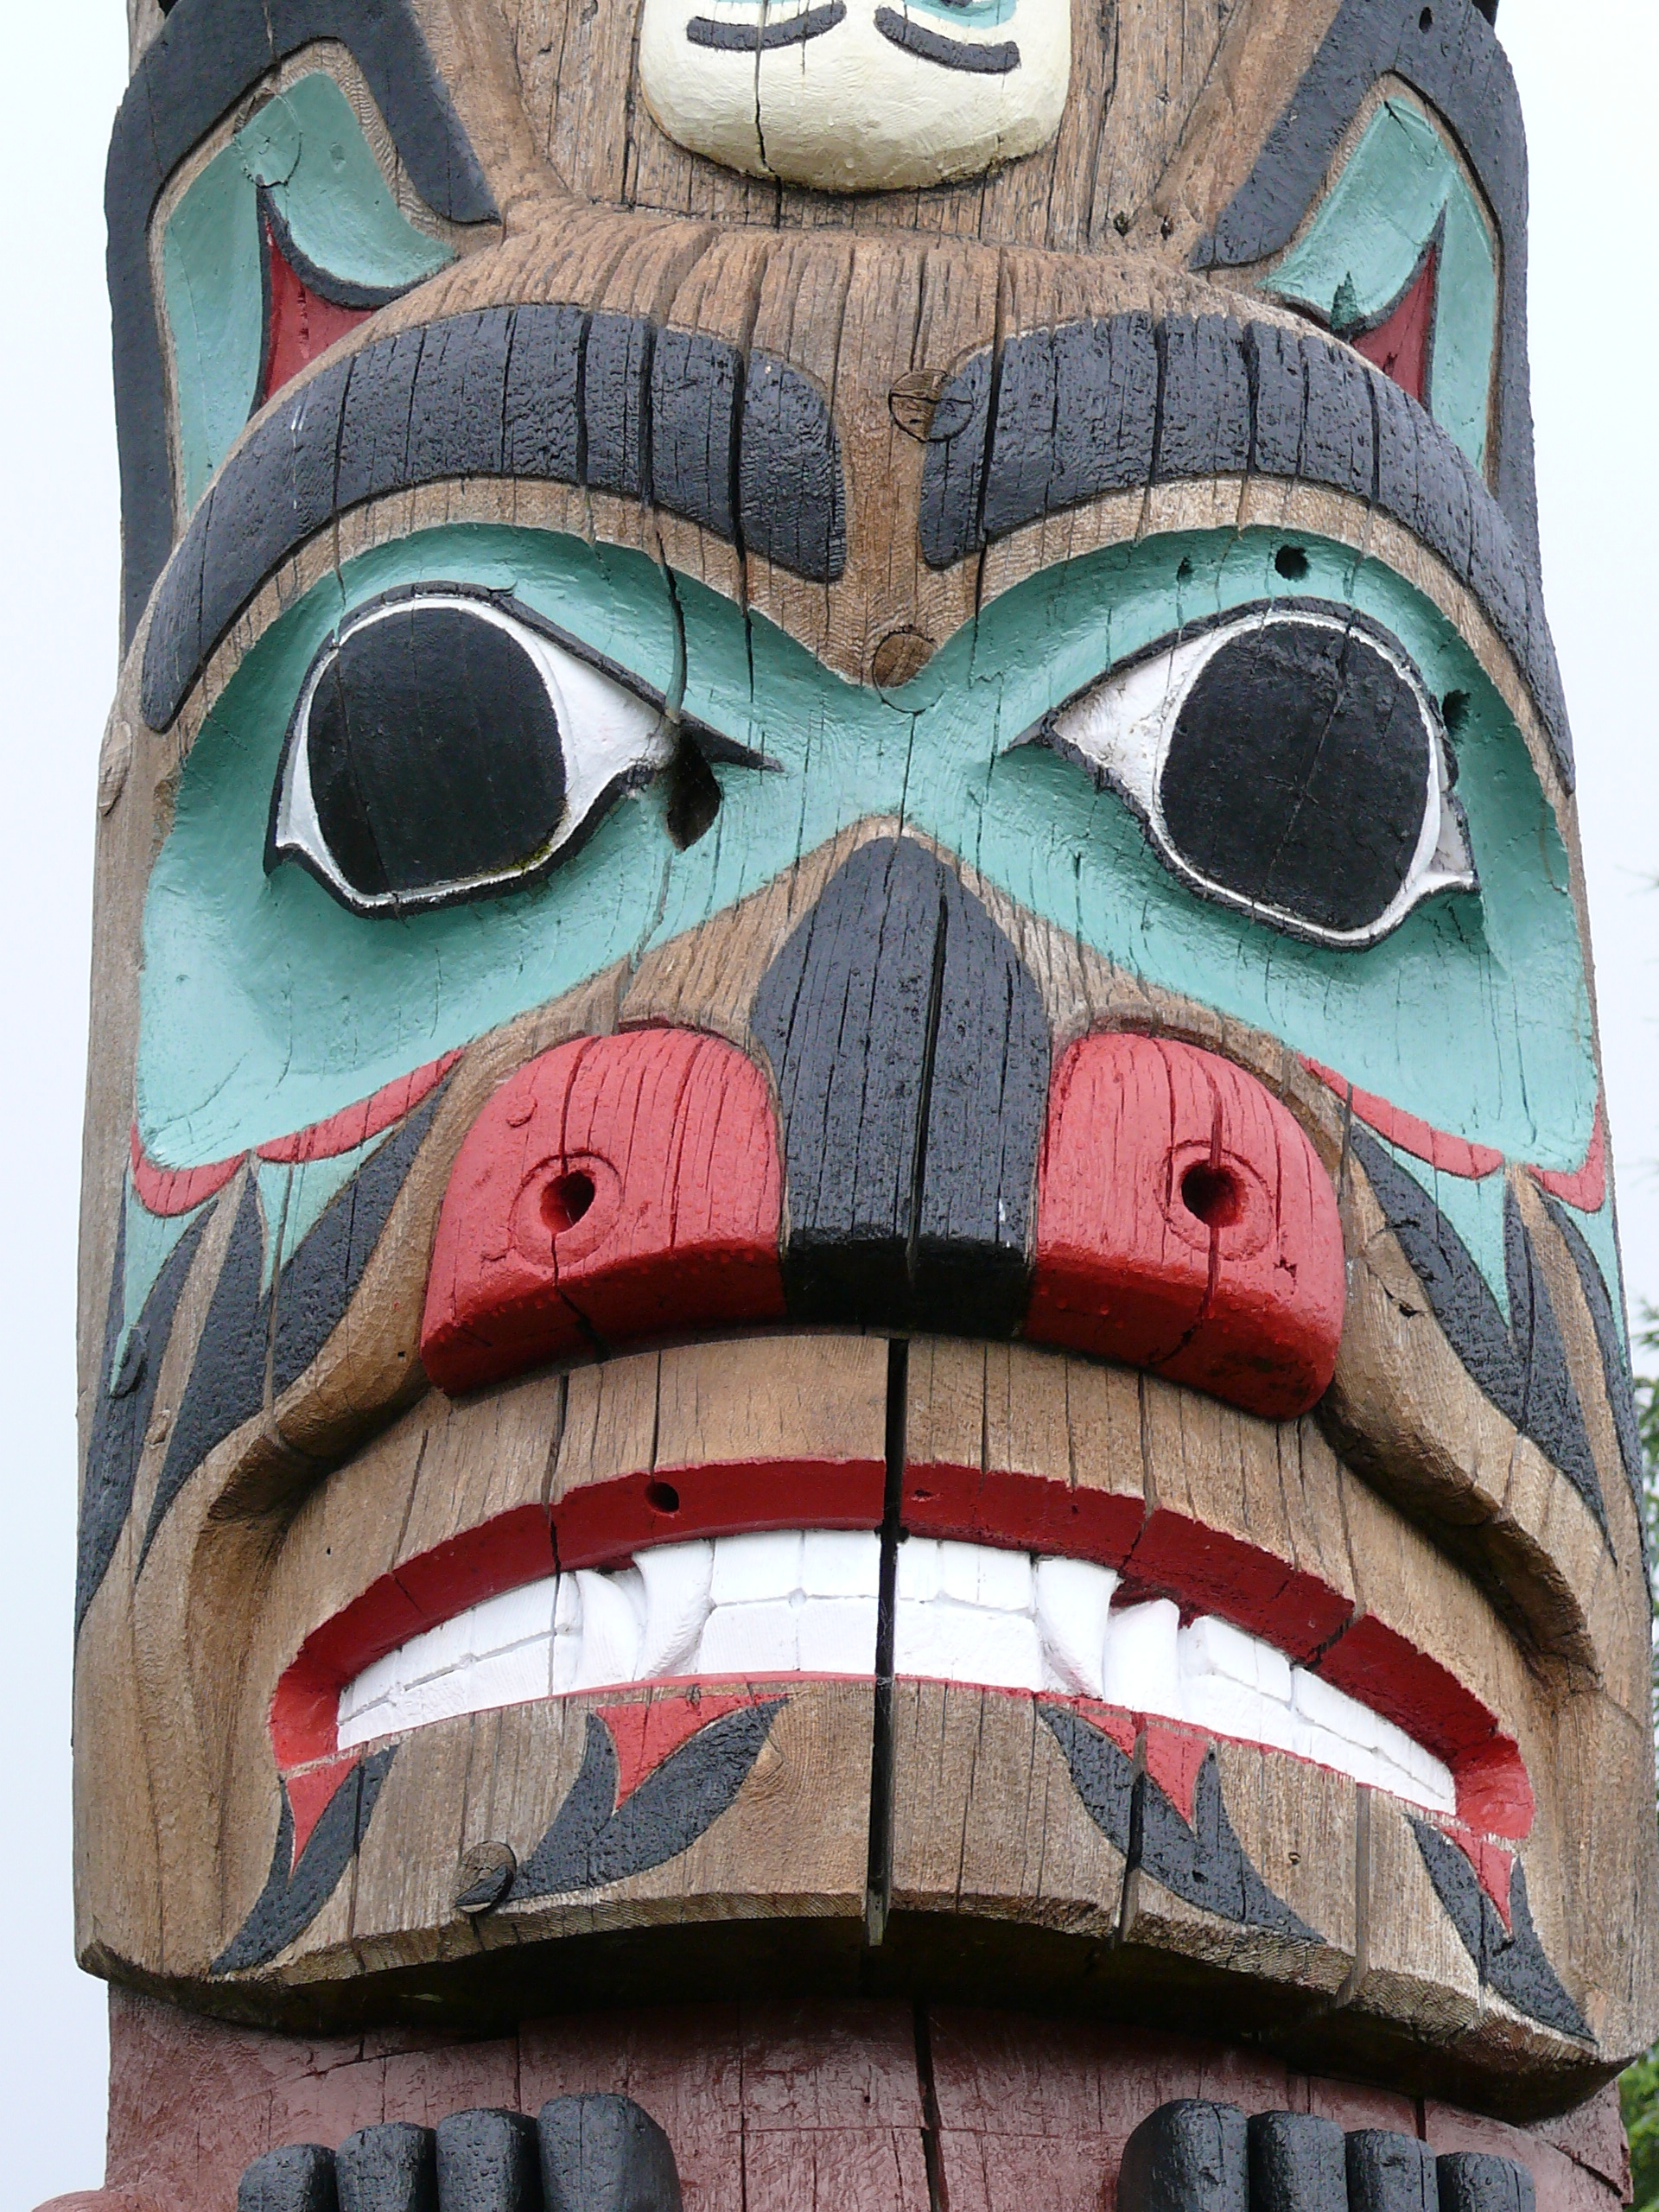 Bear face on a totem pole | Pics4Learning